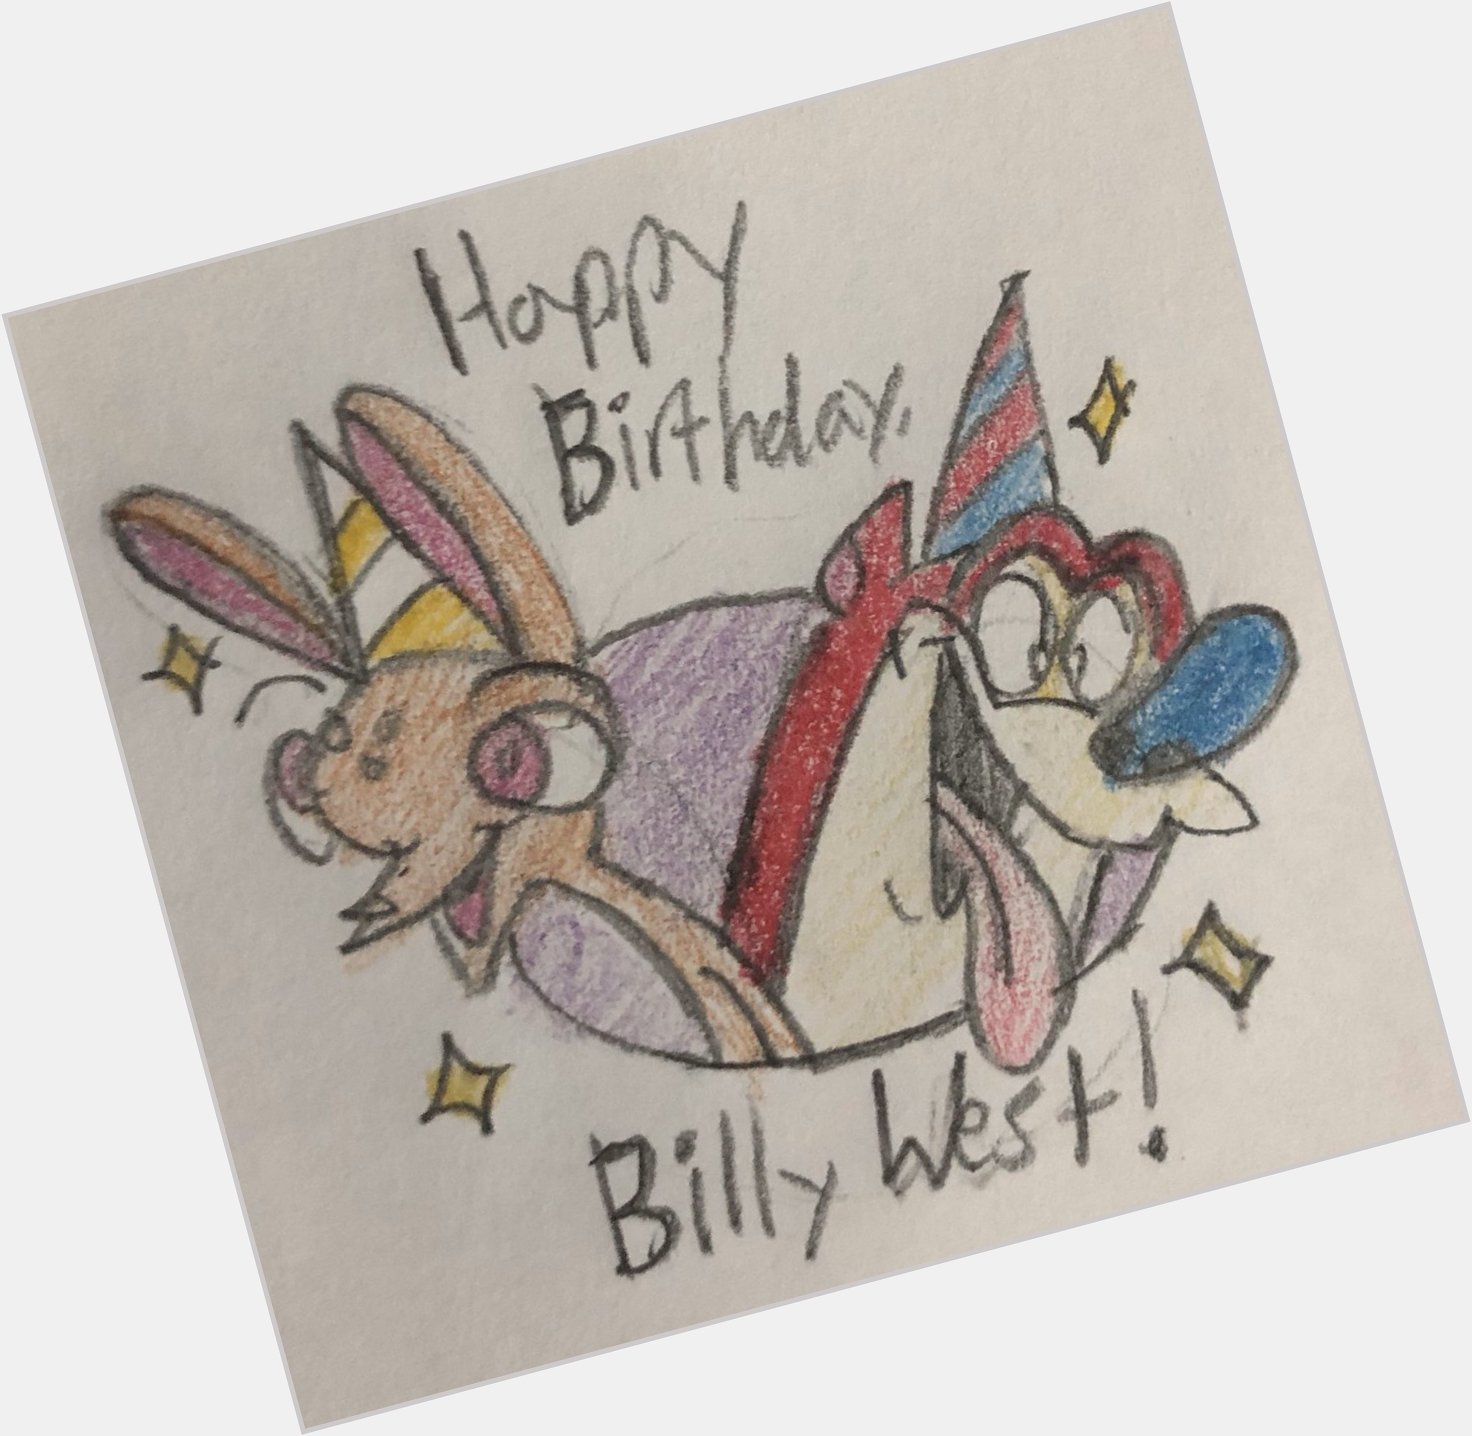 Happy birthday to Billy West, the voice behind Ren and Stimpy!   